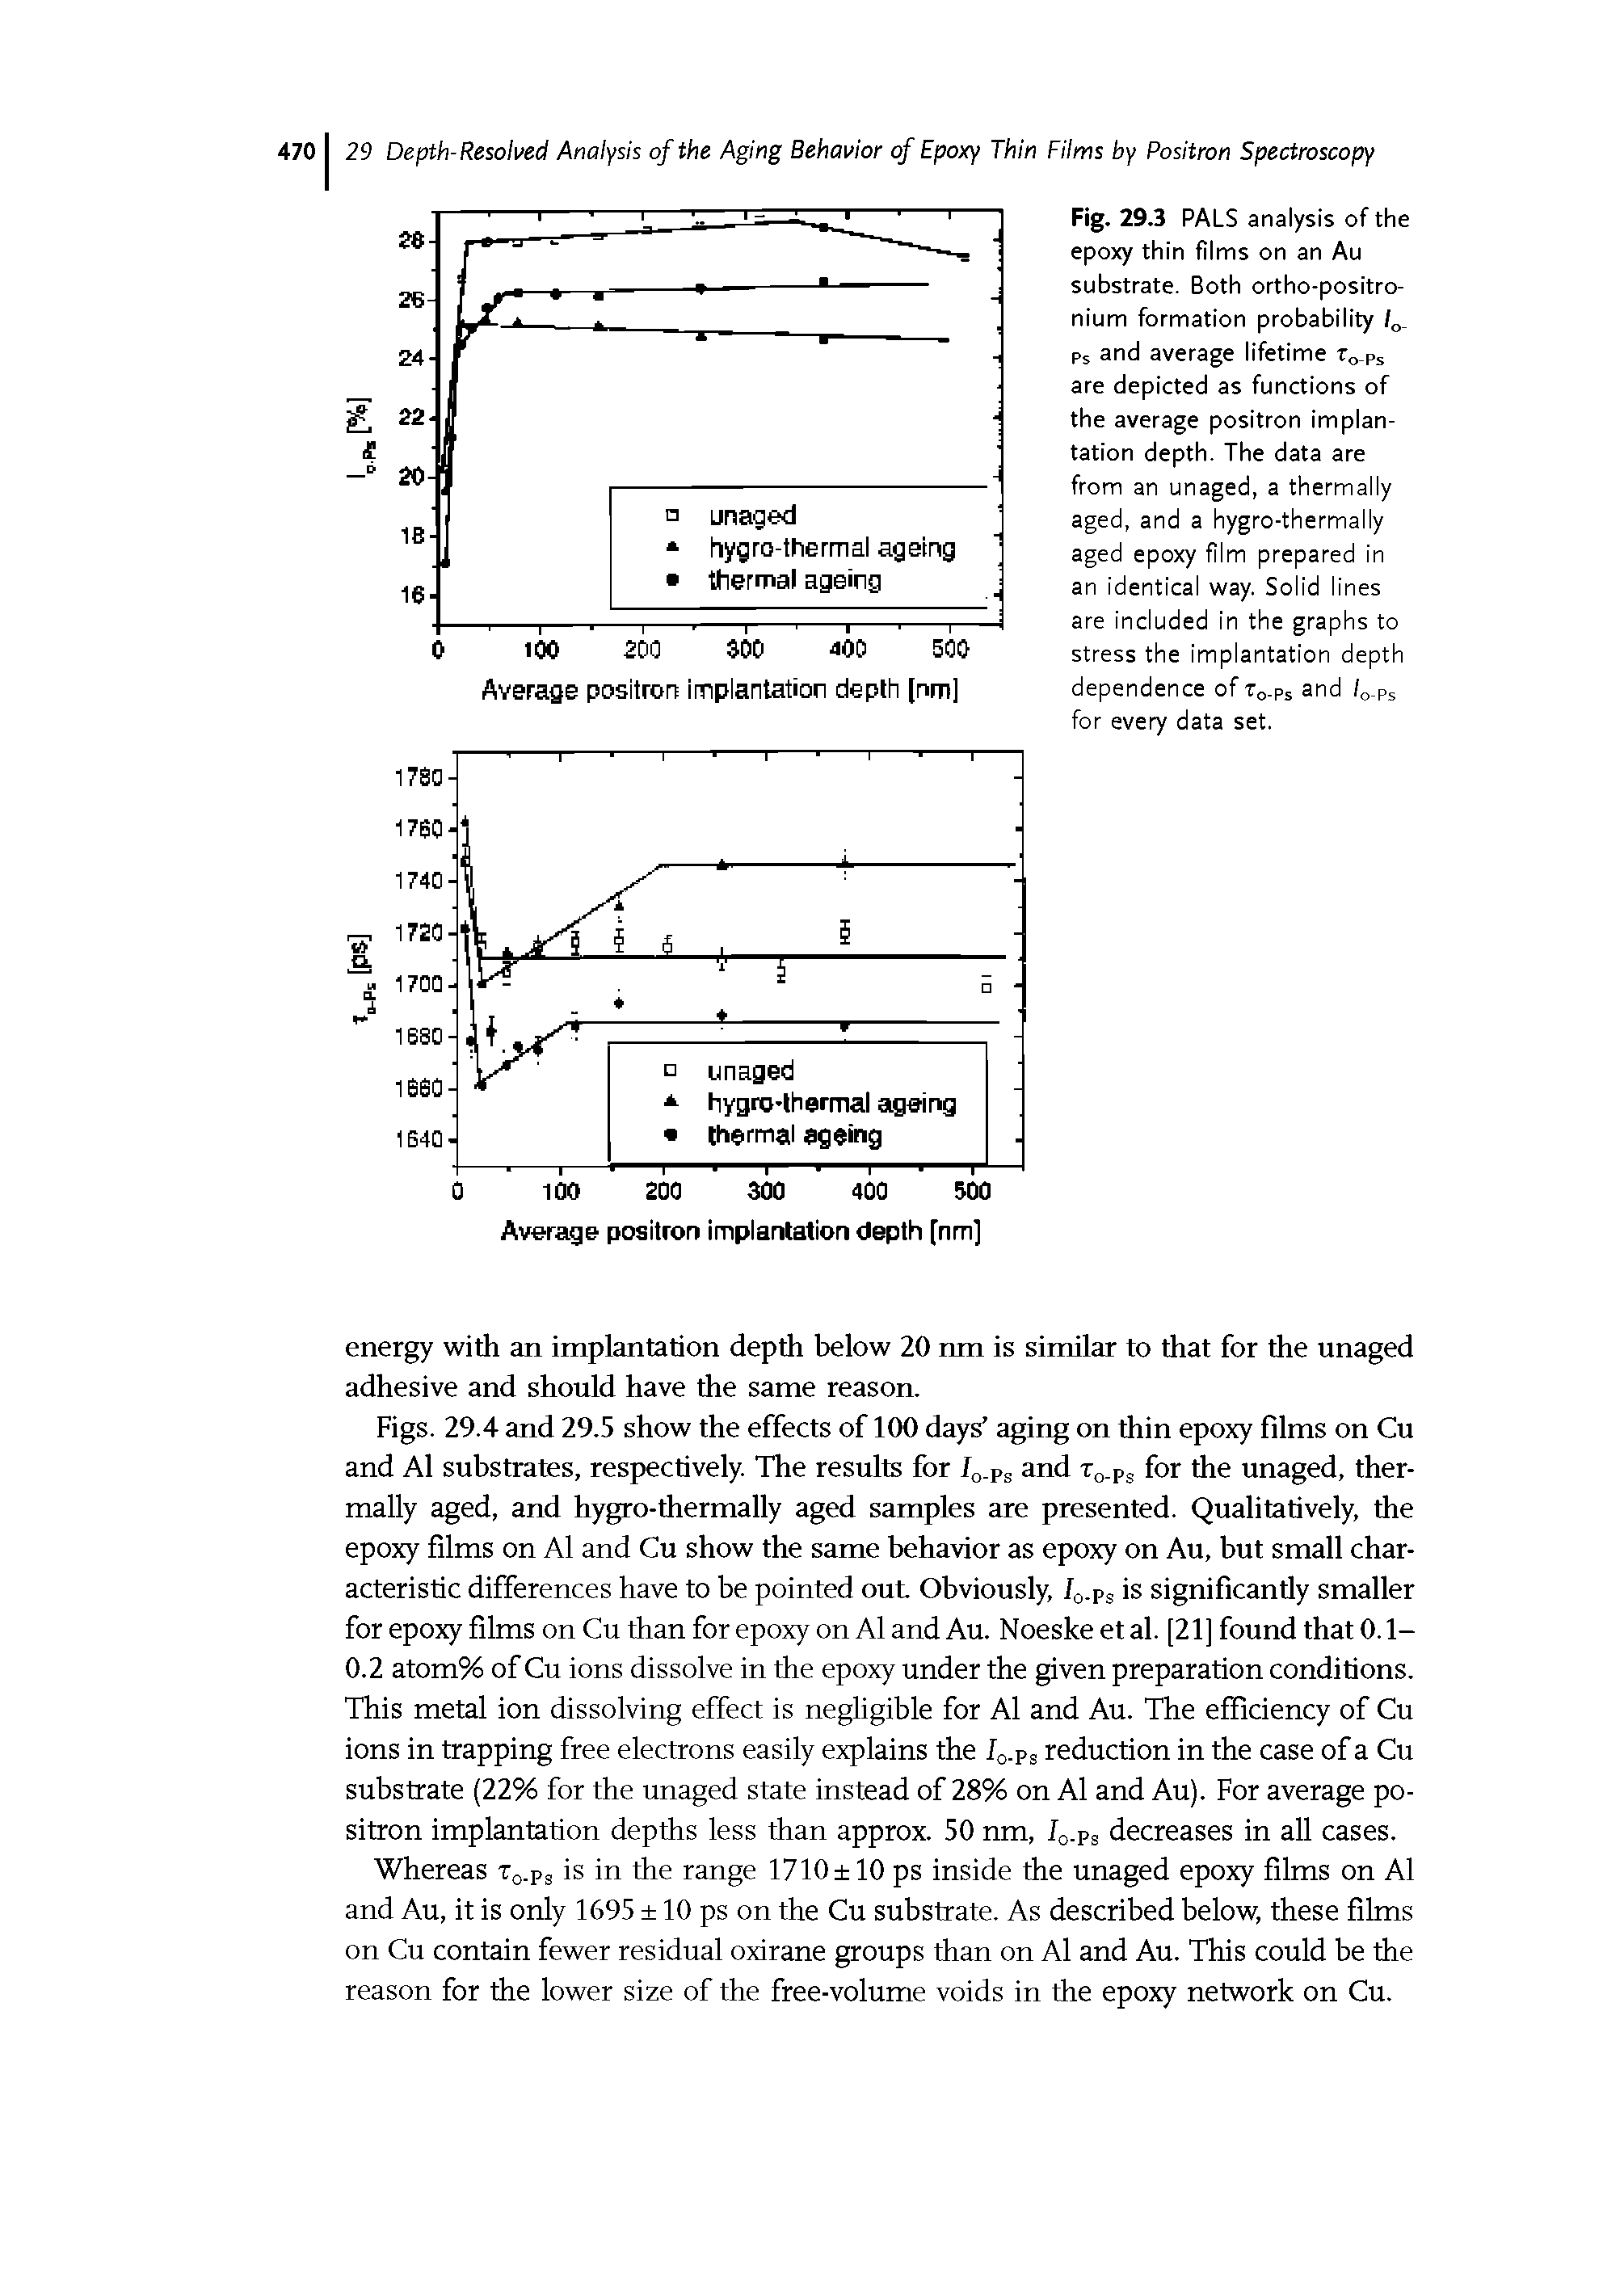 Fig. 29.3 PALS analysis of the epoxy thin films on an Au substrate. Both ortho-positro-nium formation probability Ps and average lifetime To-ps are depicted as functions of the average positron implantation depth. The data are from an unaged, a thermally aged, and a hygro-thermally aged epoxy film prepared in an identical way. Solid lines are included in the graphs to stress the implantation depth dependence of To-ps and /g.ps for every data set.